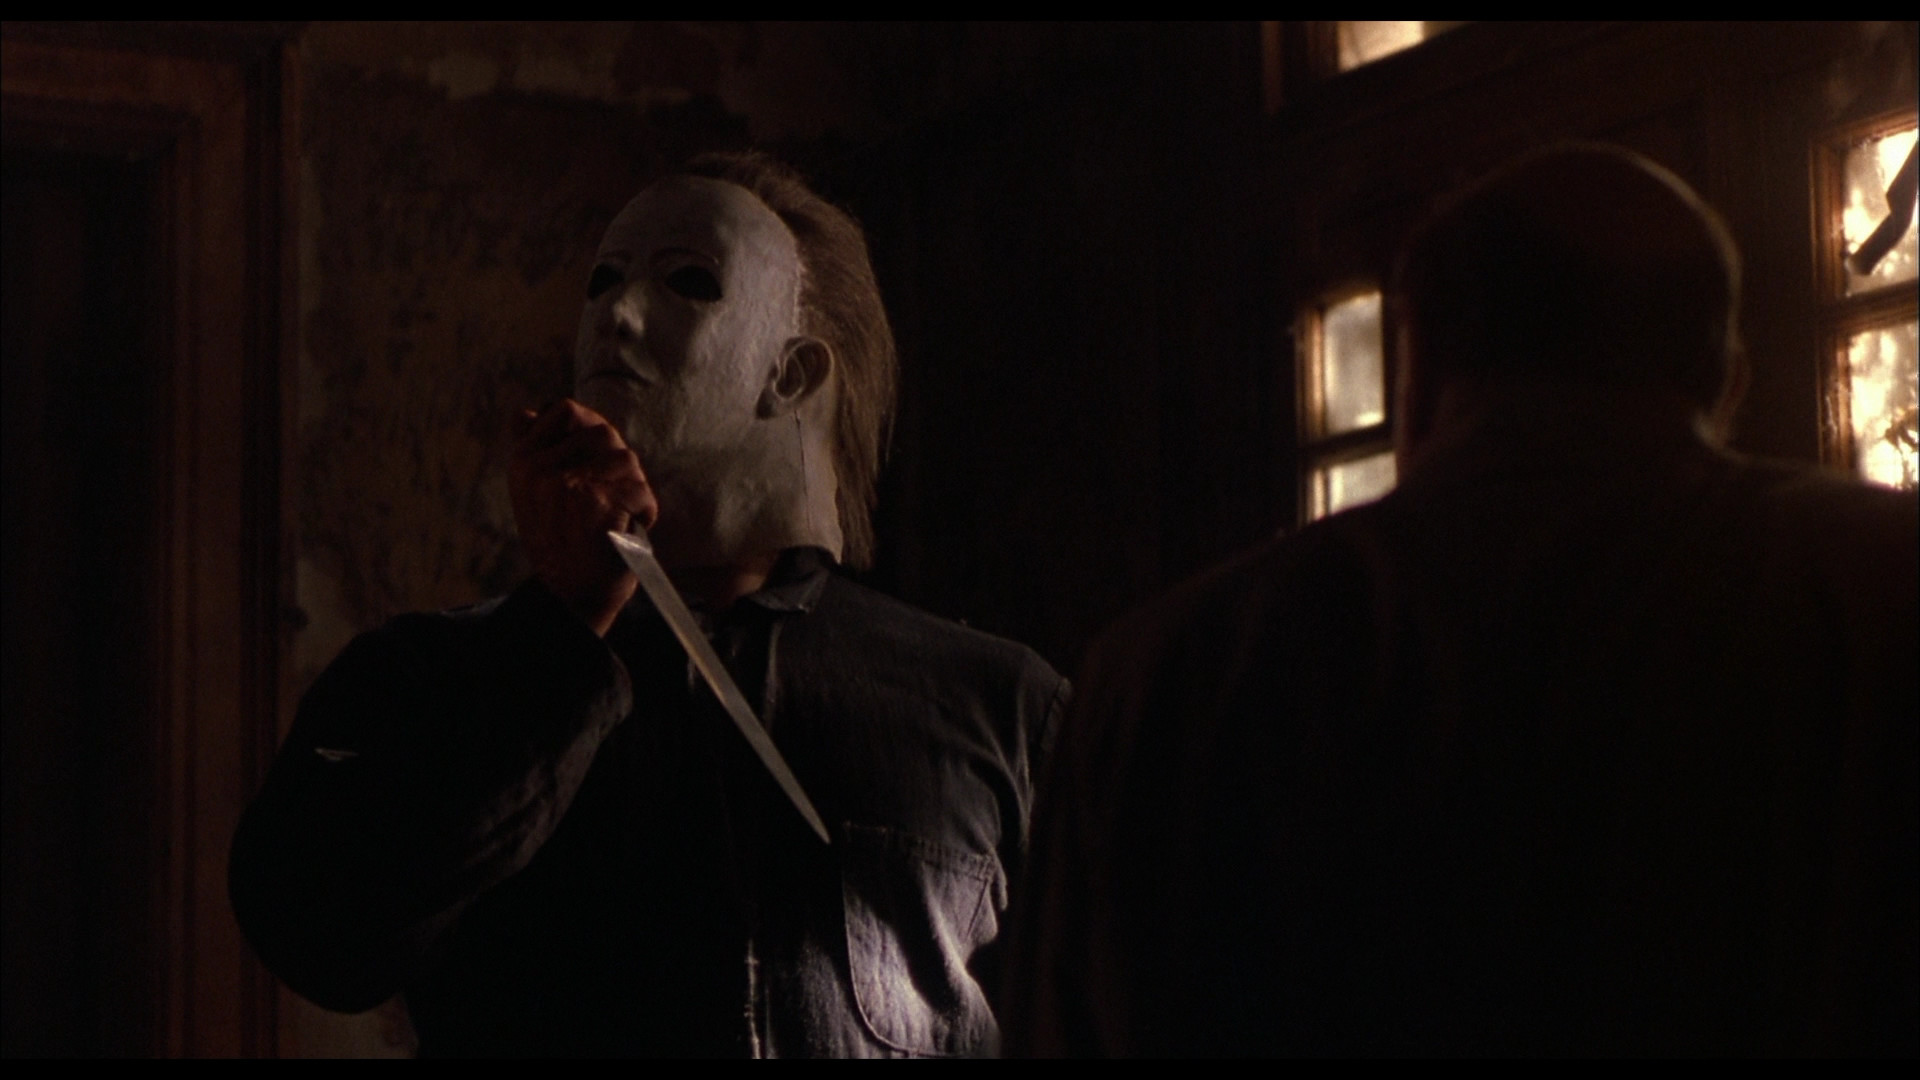 1920x1080 Review: Halloween 5 BD + Screen Caps – Movieman's Guide to the Movies